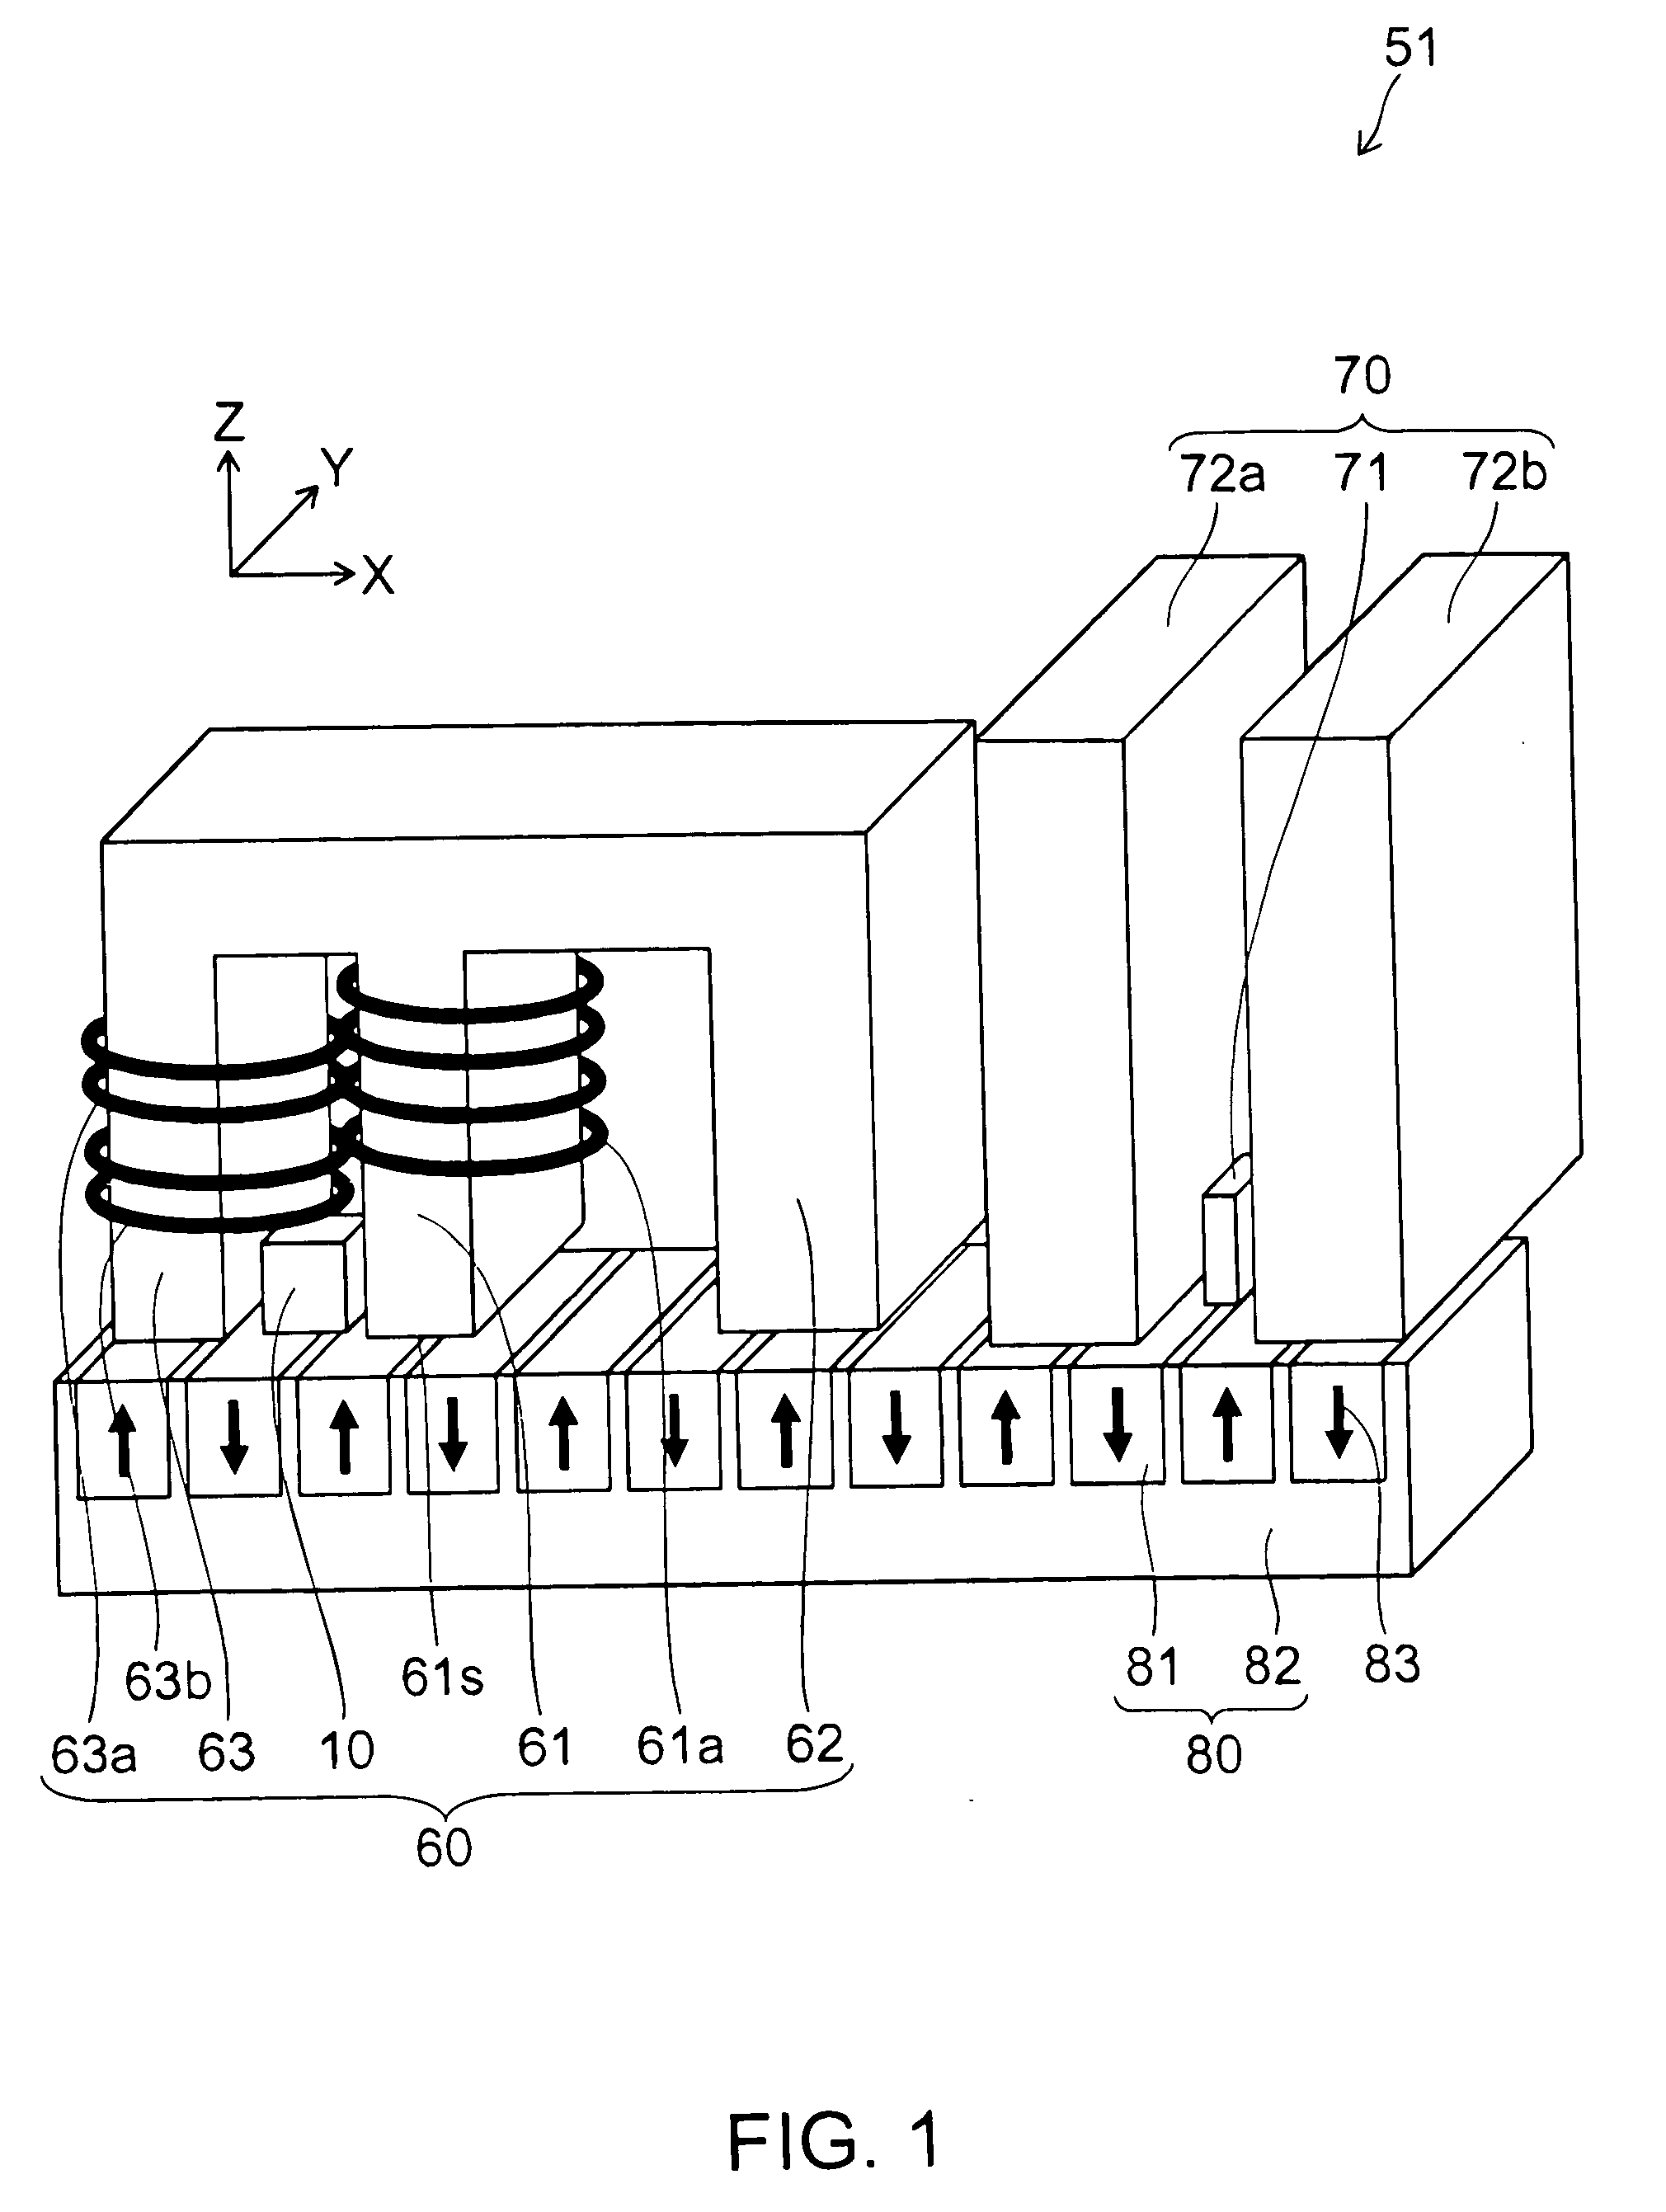 Magnetic recording head, magnetic head assembly, magnetic recording apparatus, and magnetic recording method